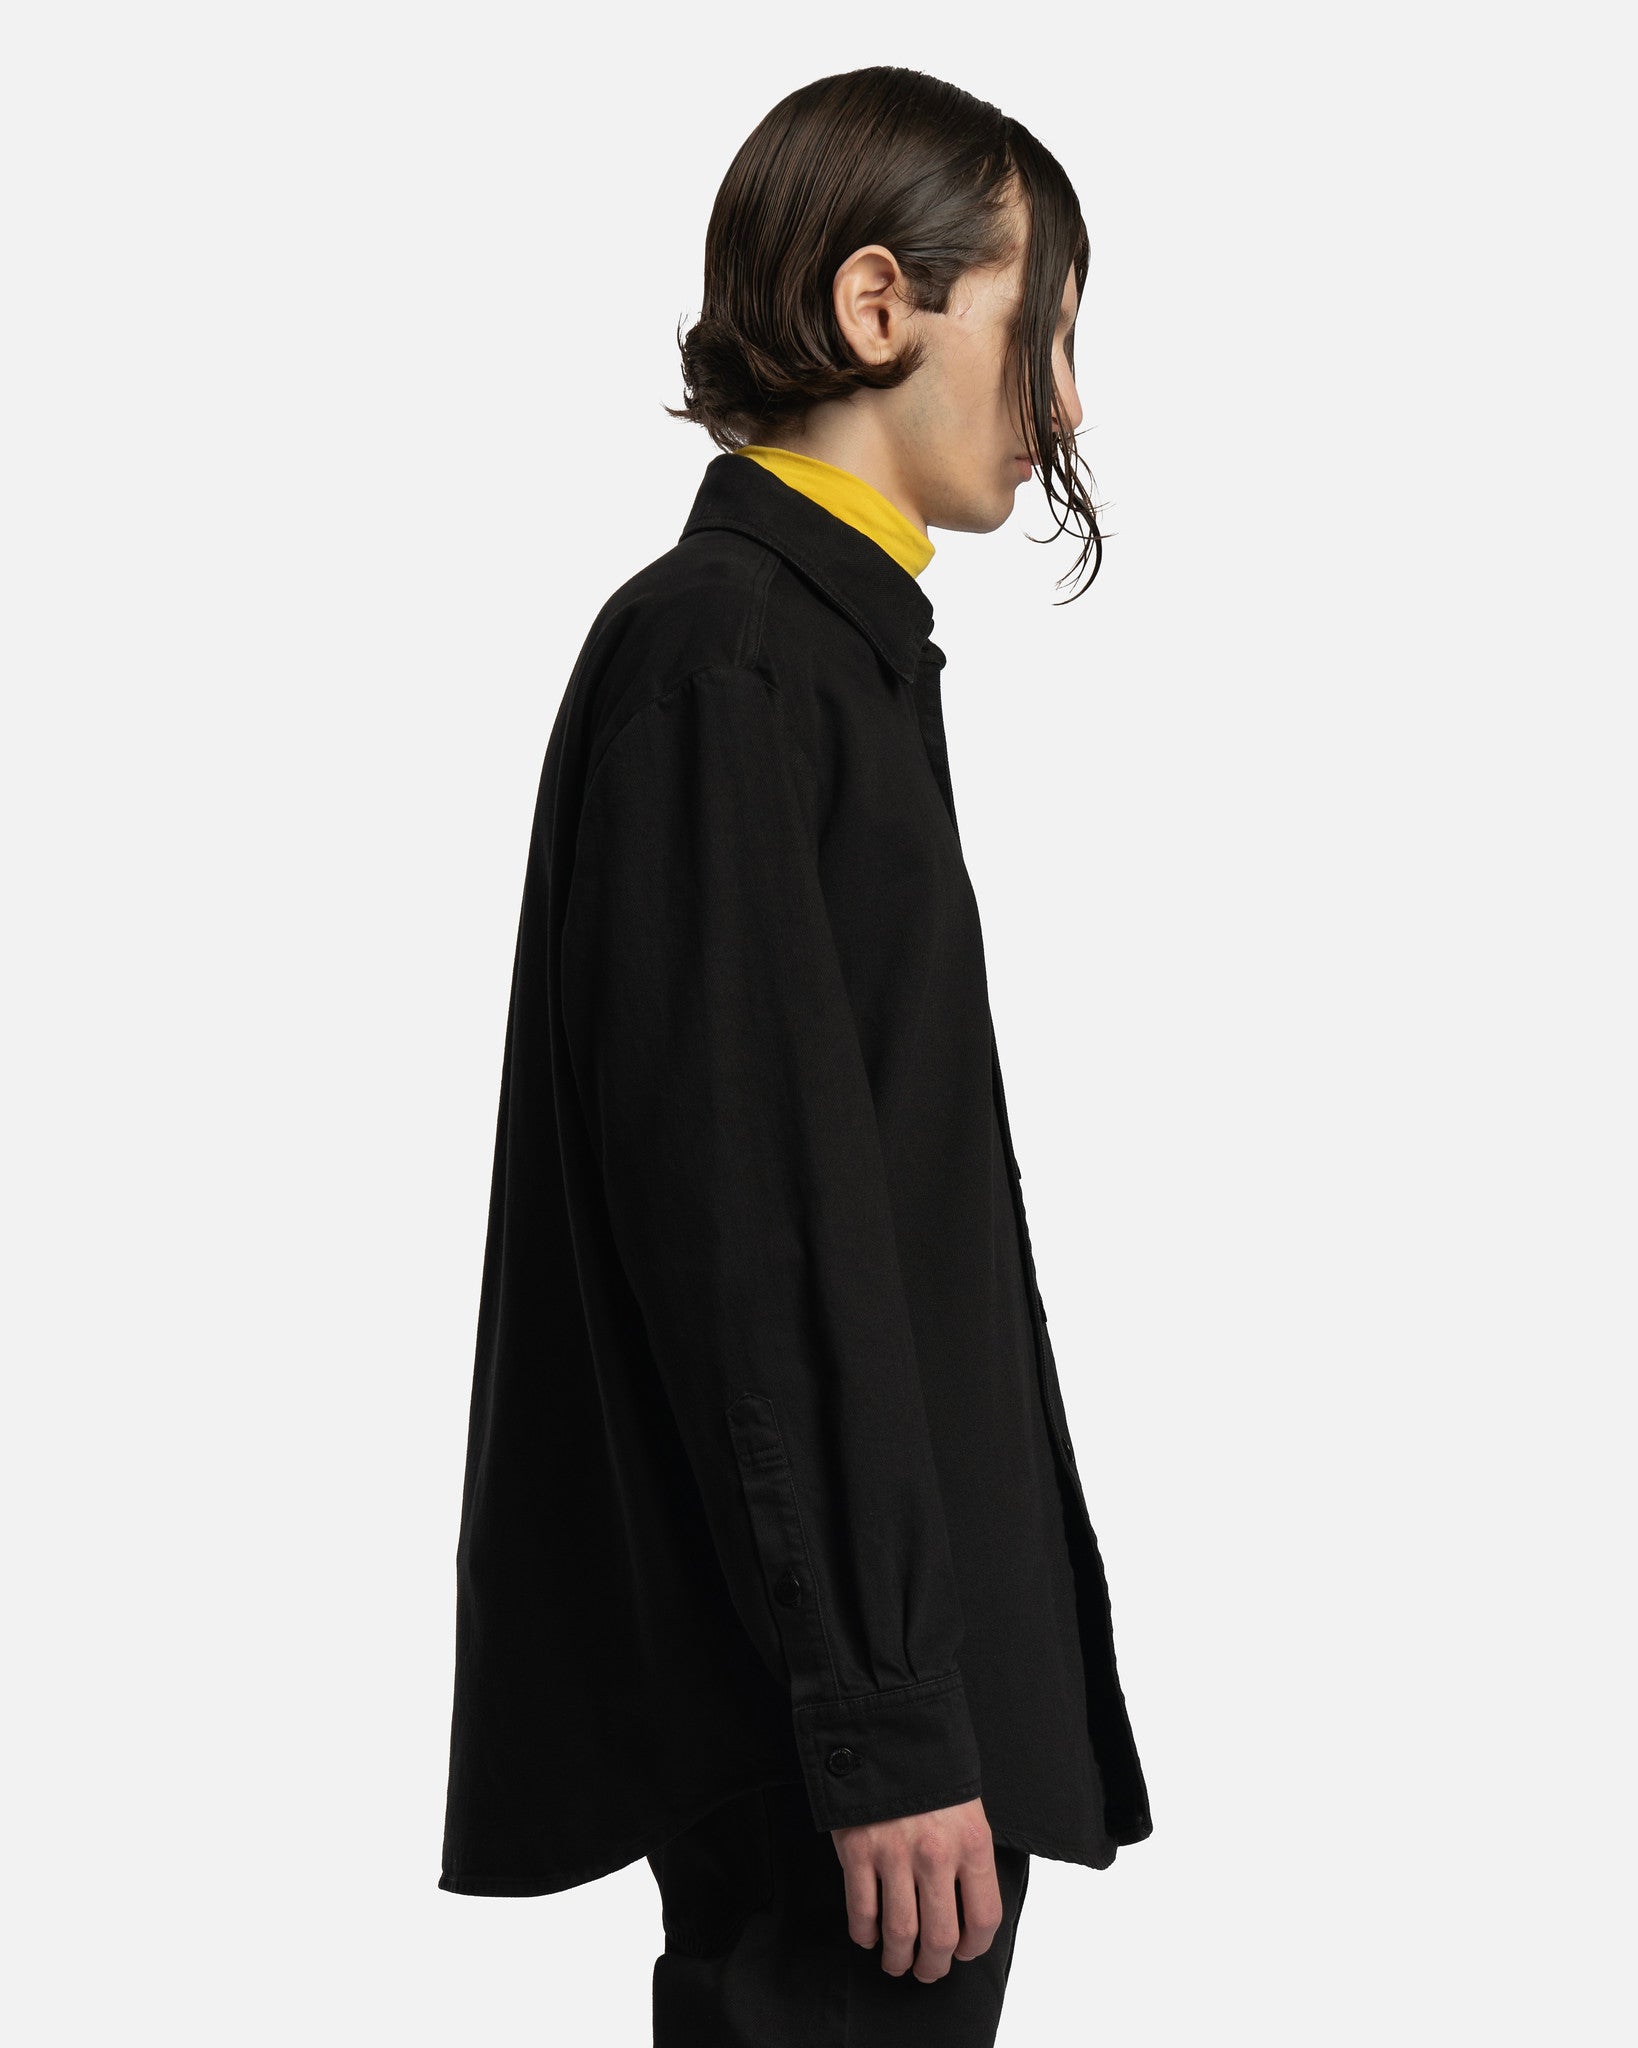 Raf Simons Men's Shirts Leather Patch Straight Fit Denim Shirt in Black